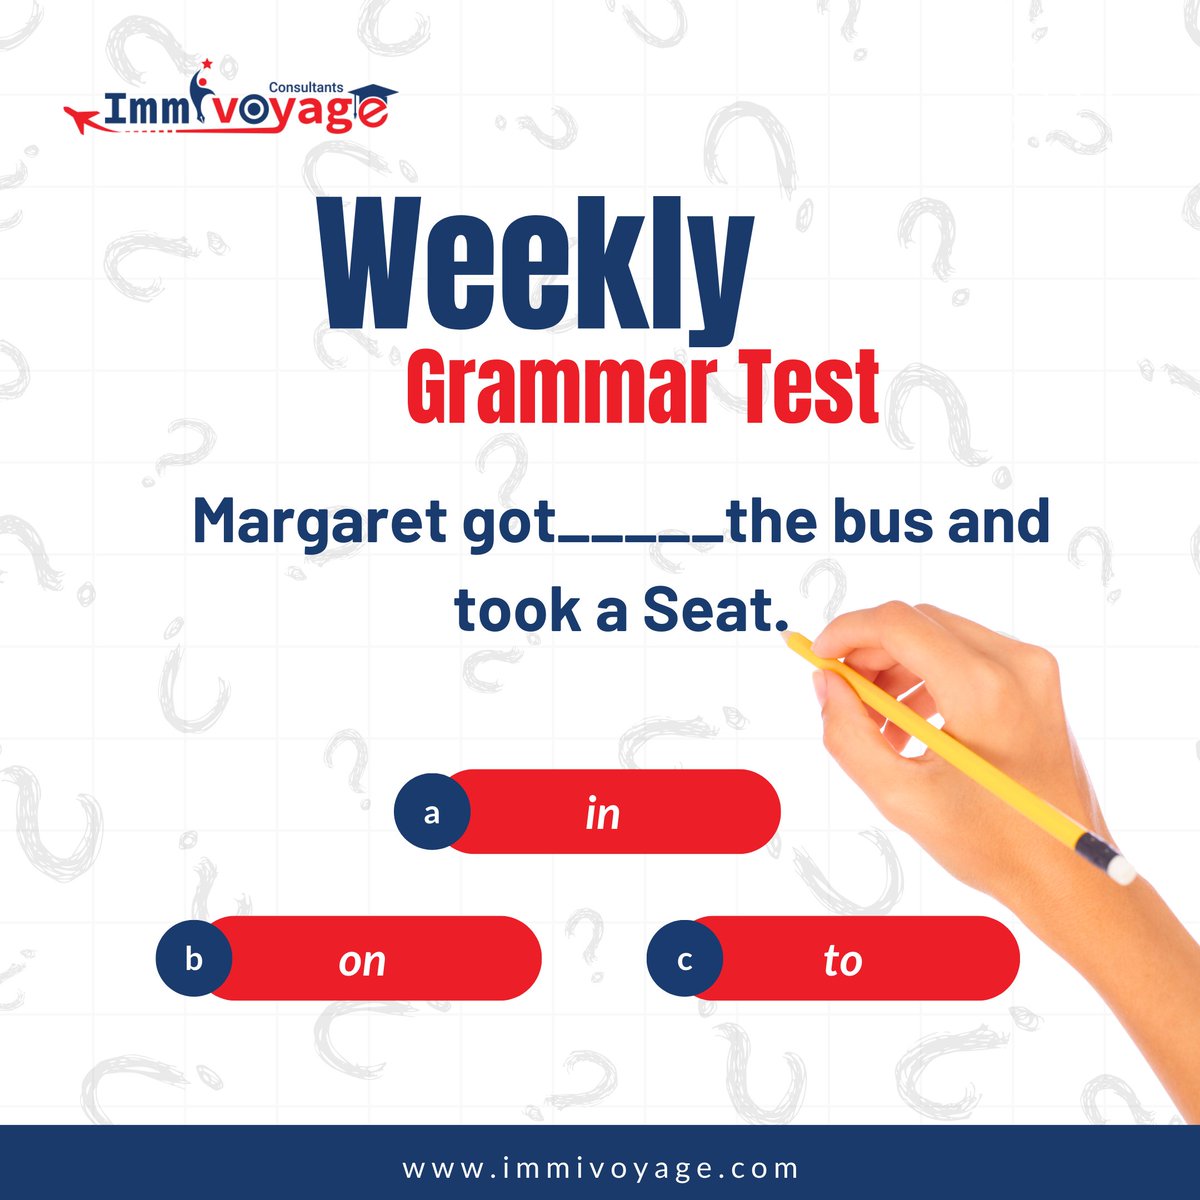 Comment below if you know the right answer. 

#weeklygrammer #immivoyage #learngrammarwithfun #immigrationservices #Englishlearn